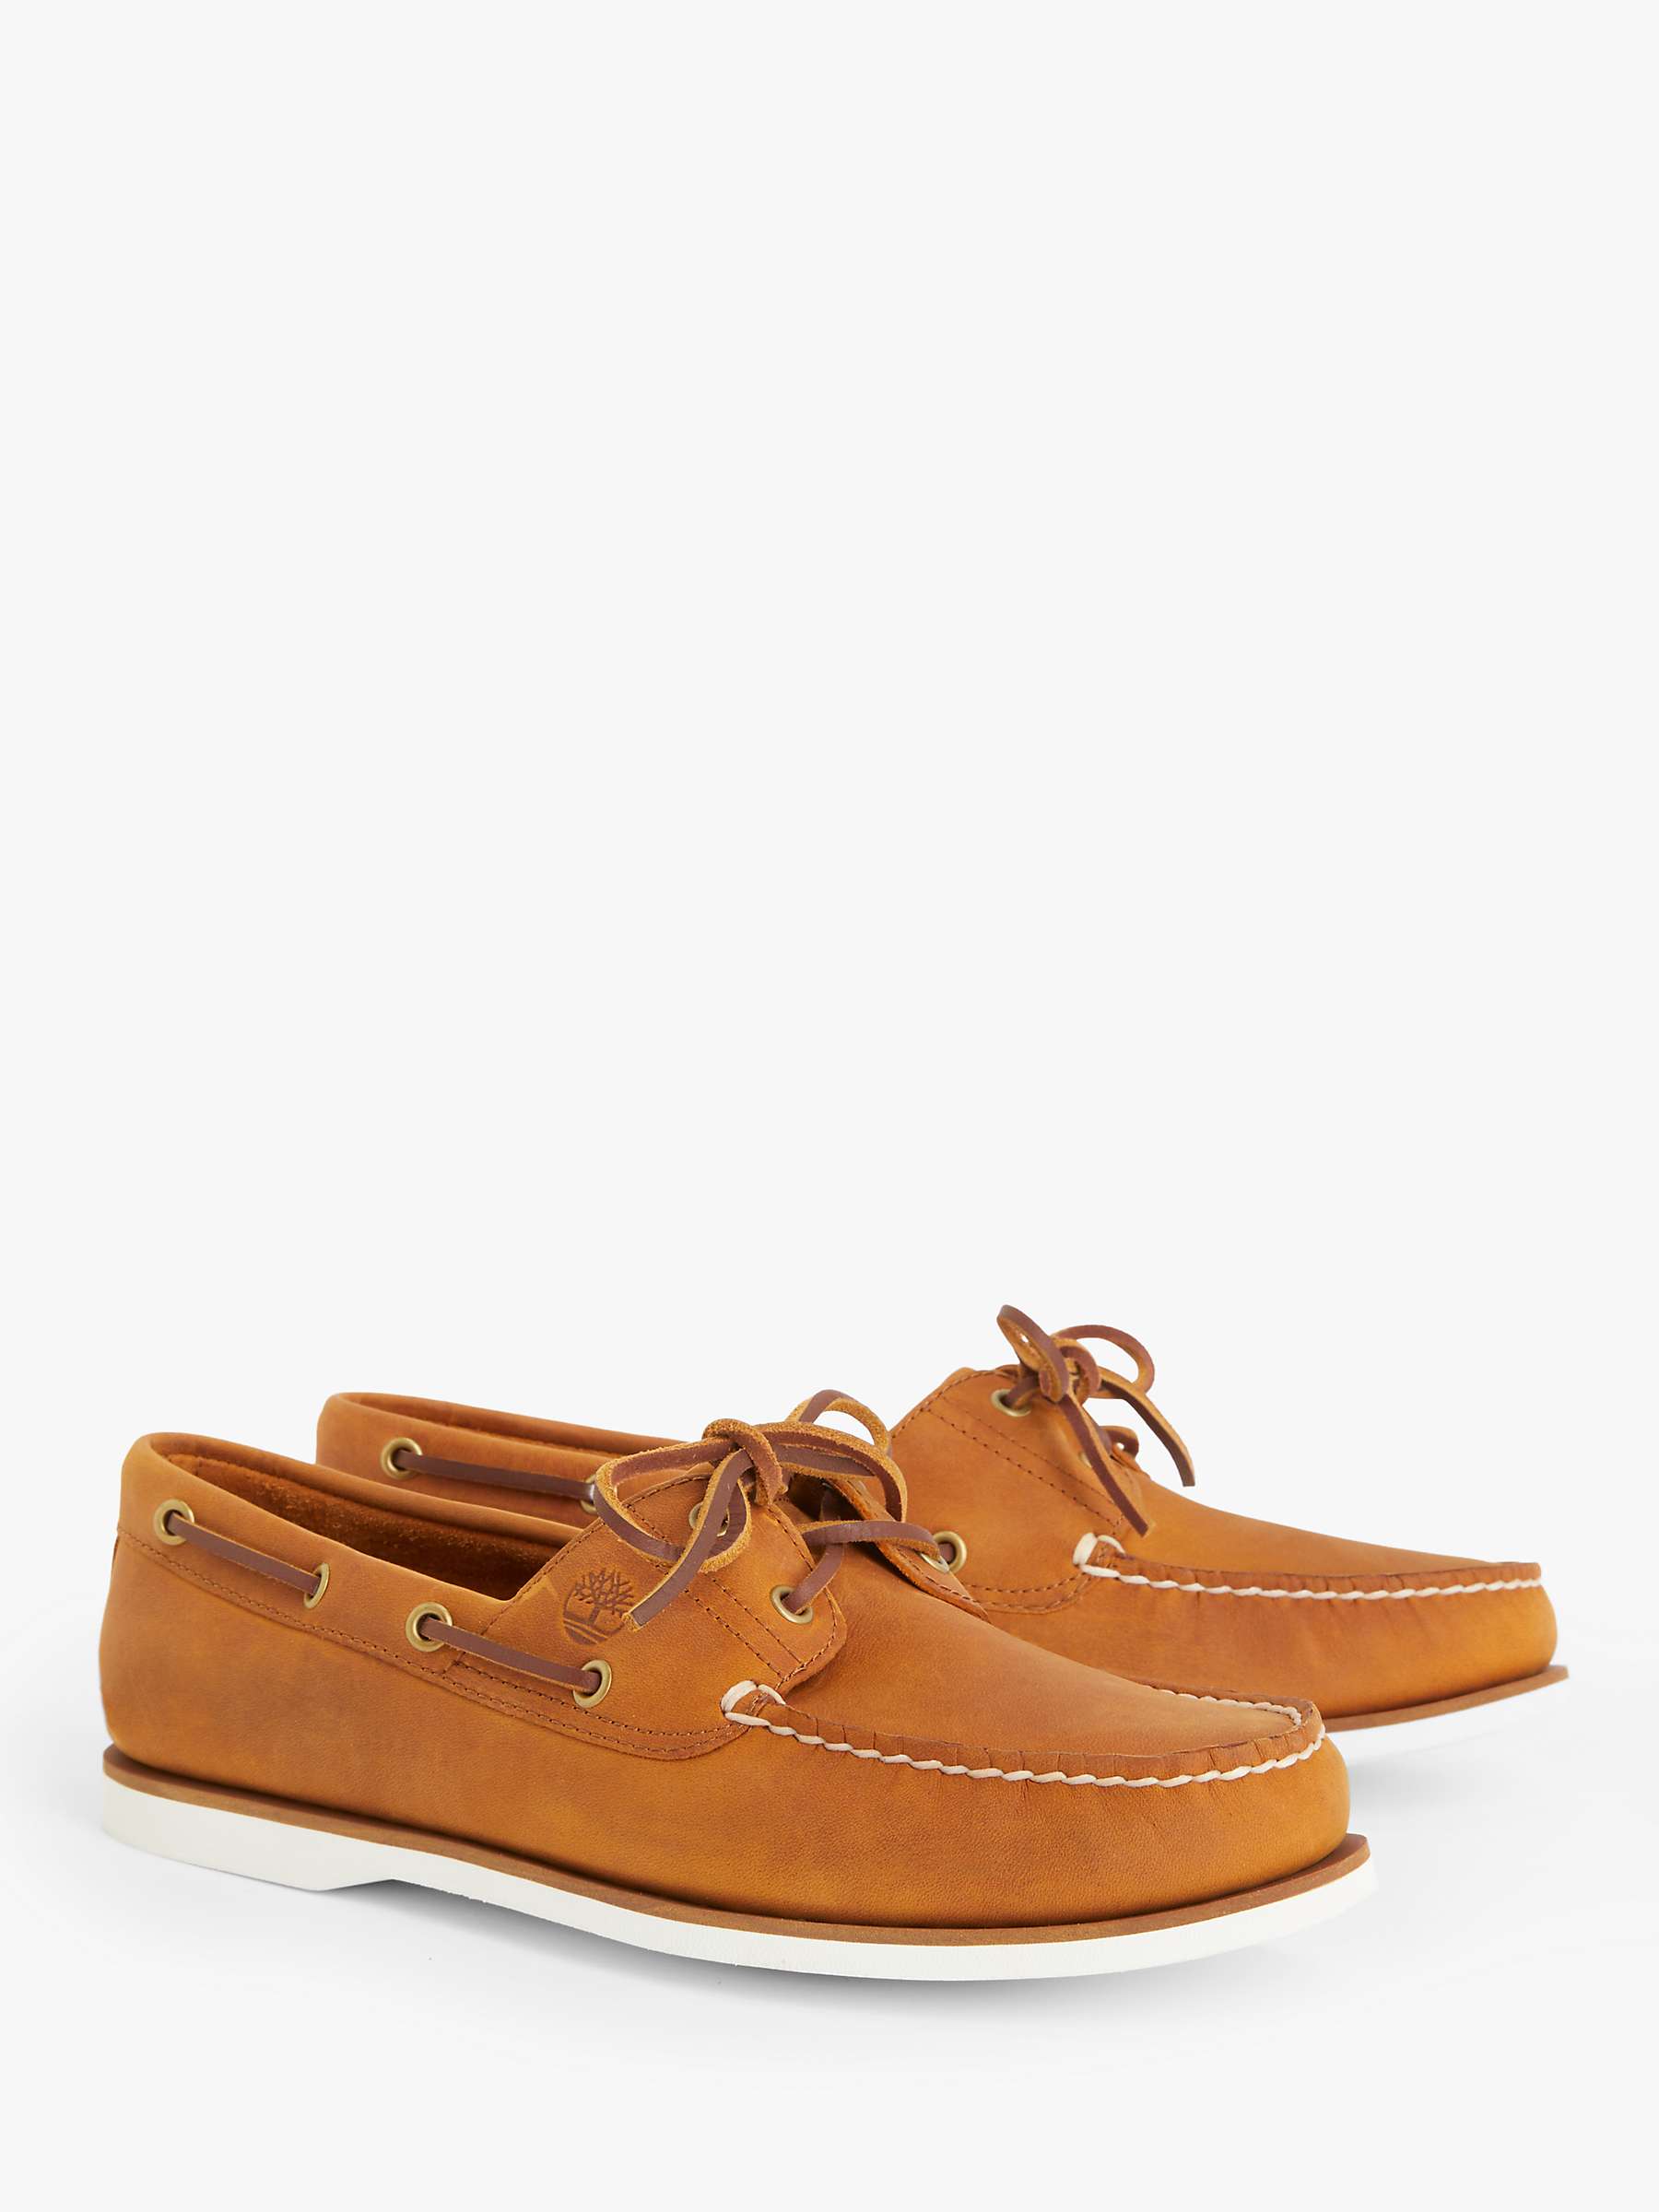 Buy Timberland Classic 2 Eye Leather Boat Shoes, Brown Online at johnlewis.com